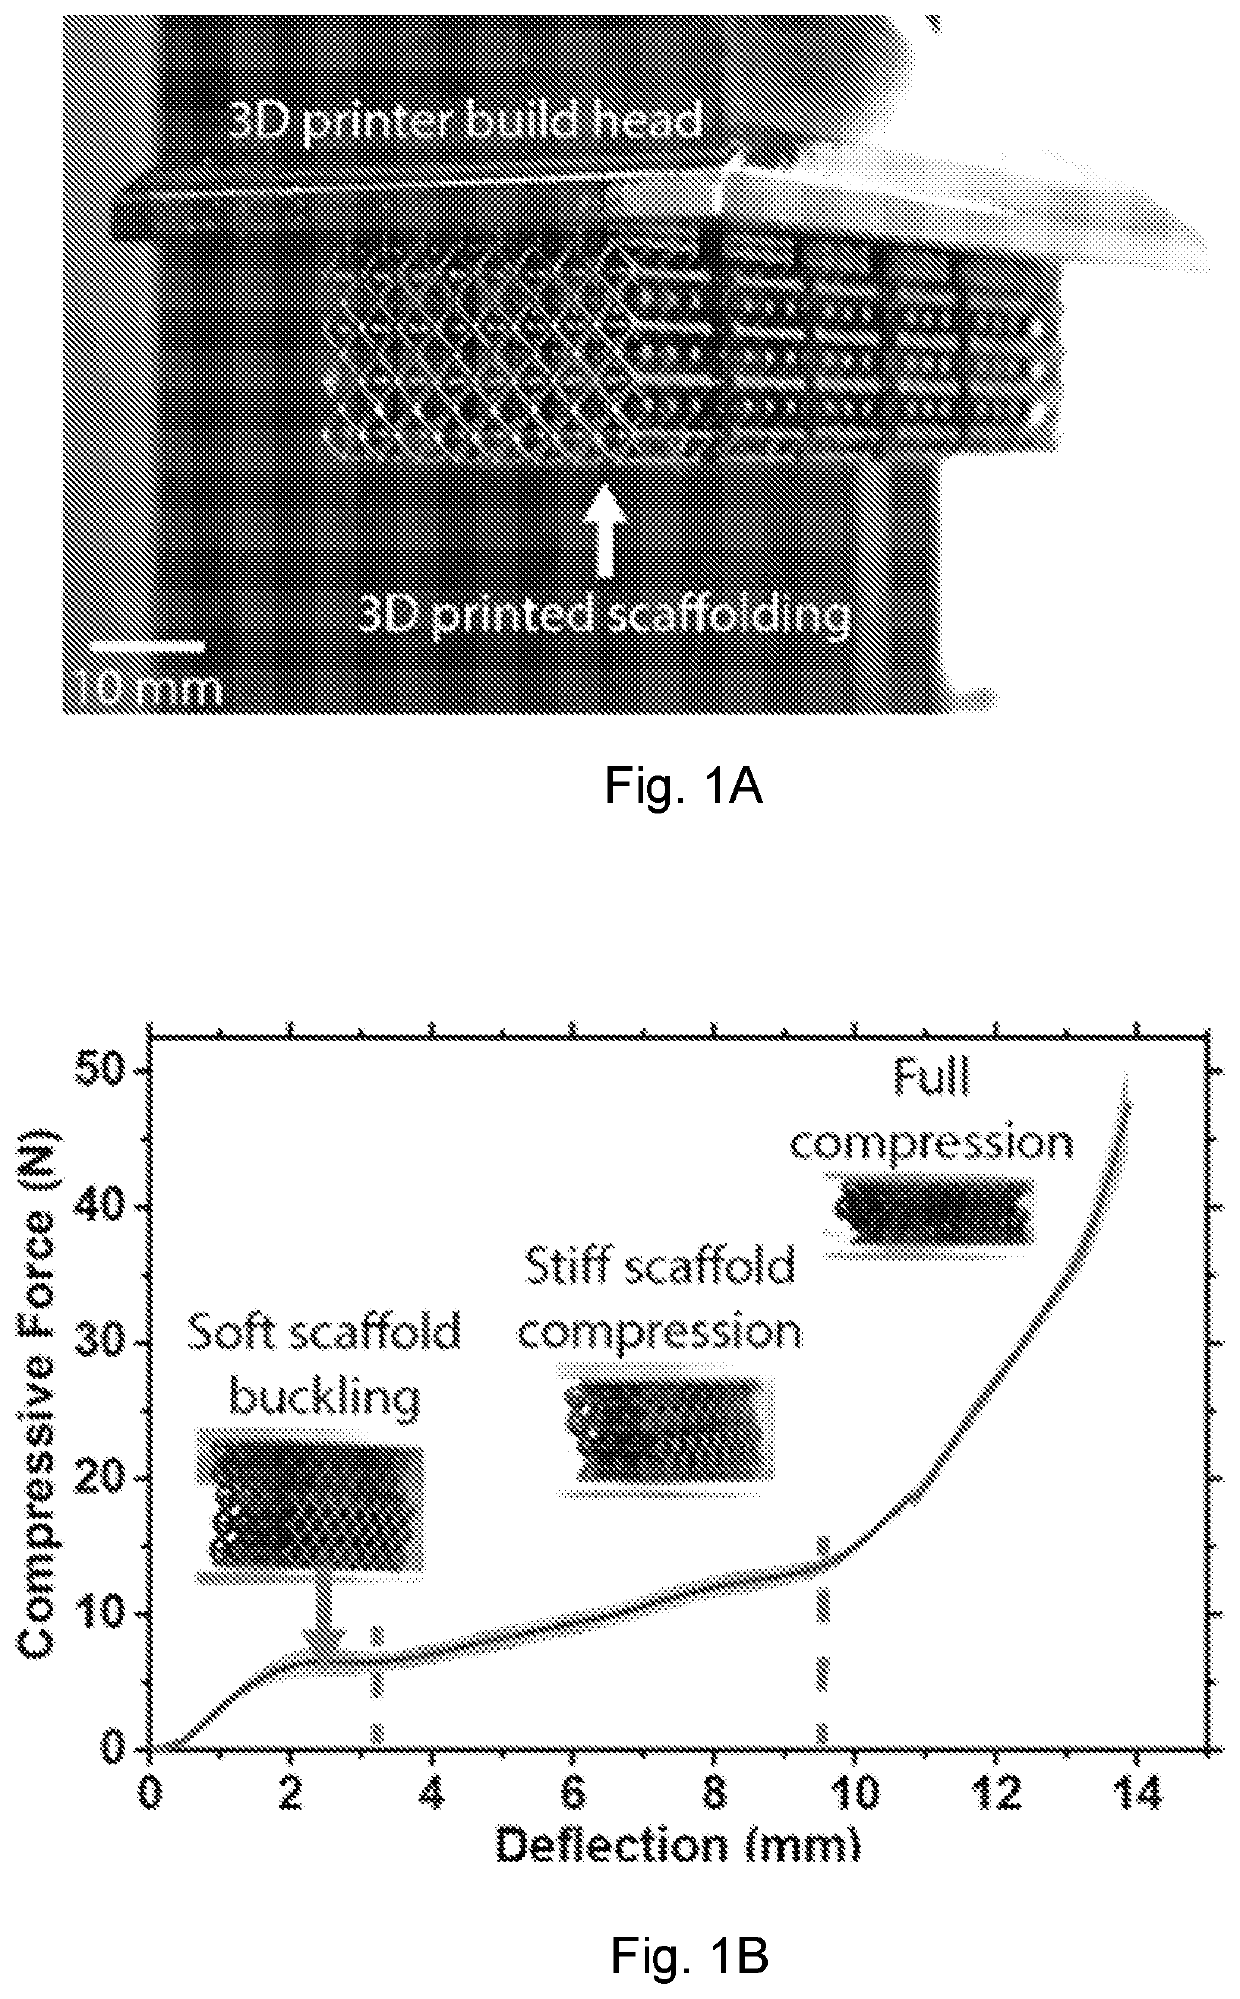 Elastomeric lightguide coupling for continuous position localization in 1,2, and 3D